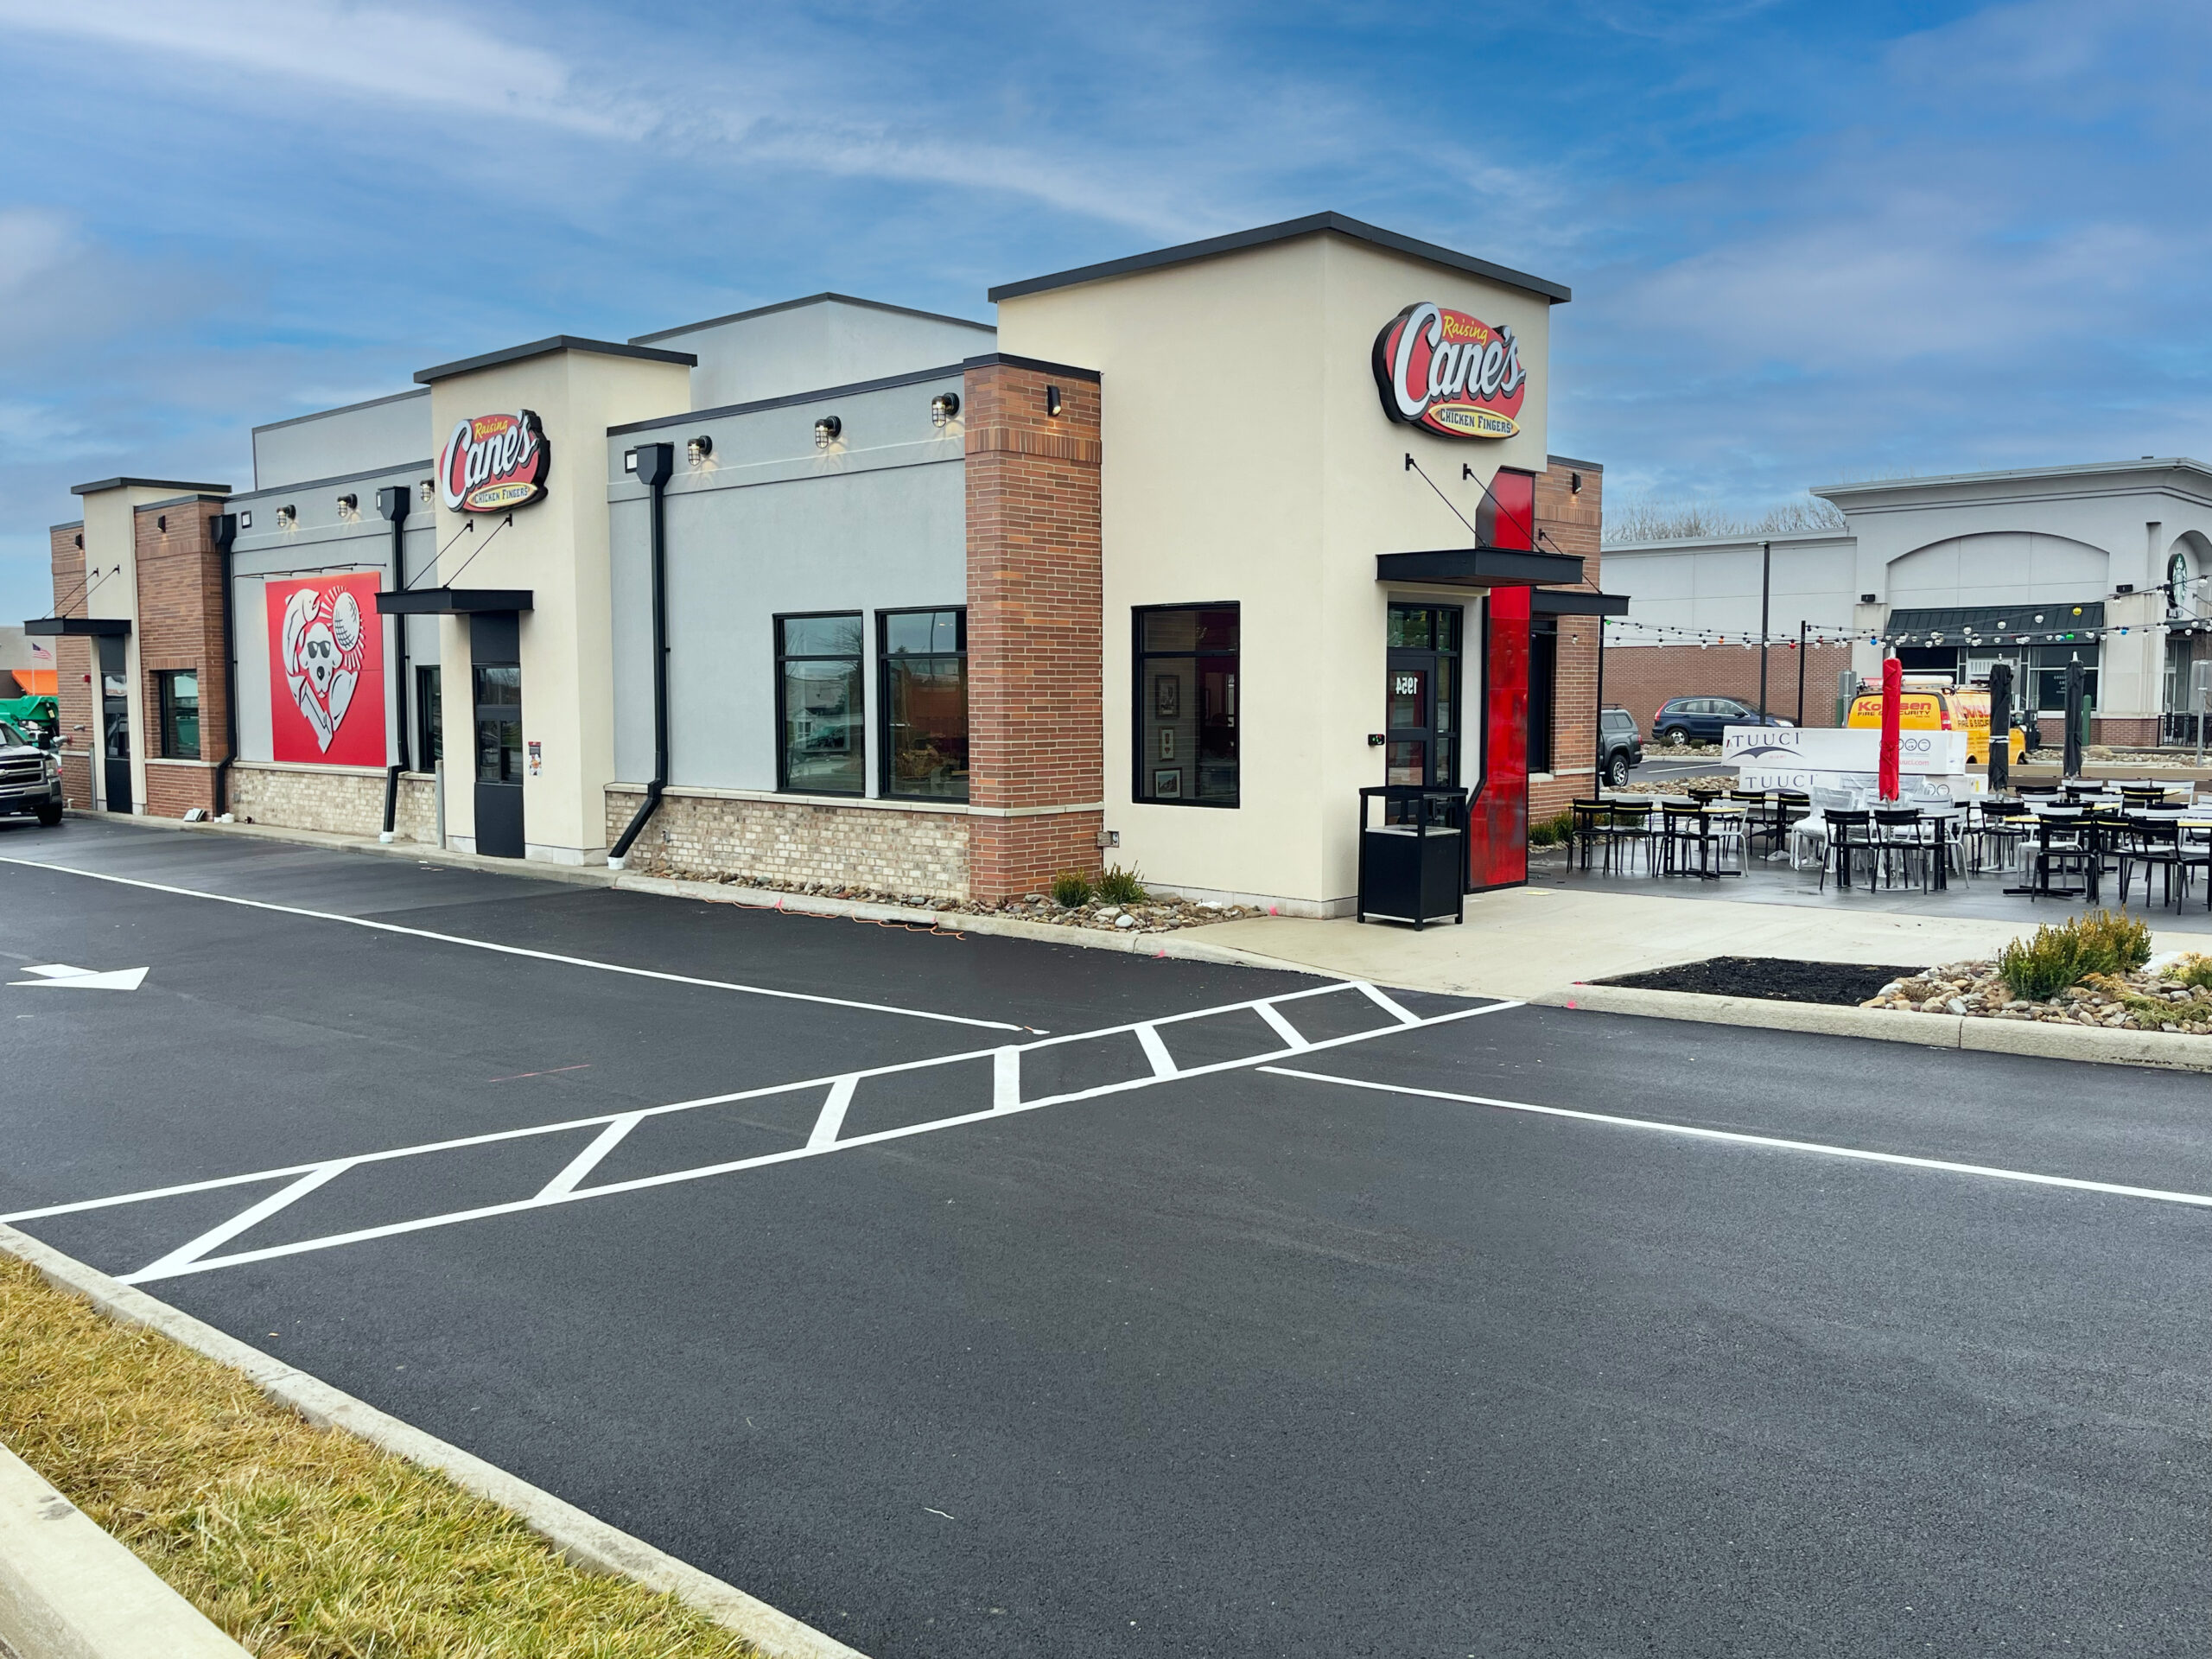 Final parking lot paving and striping for a Raising Cane's restaurant in Warren, OH